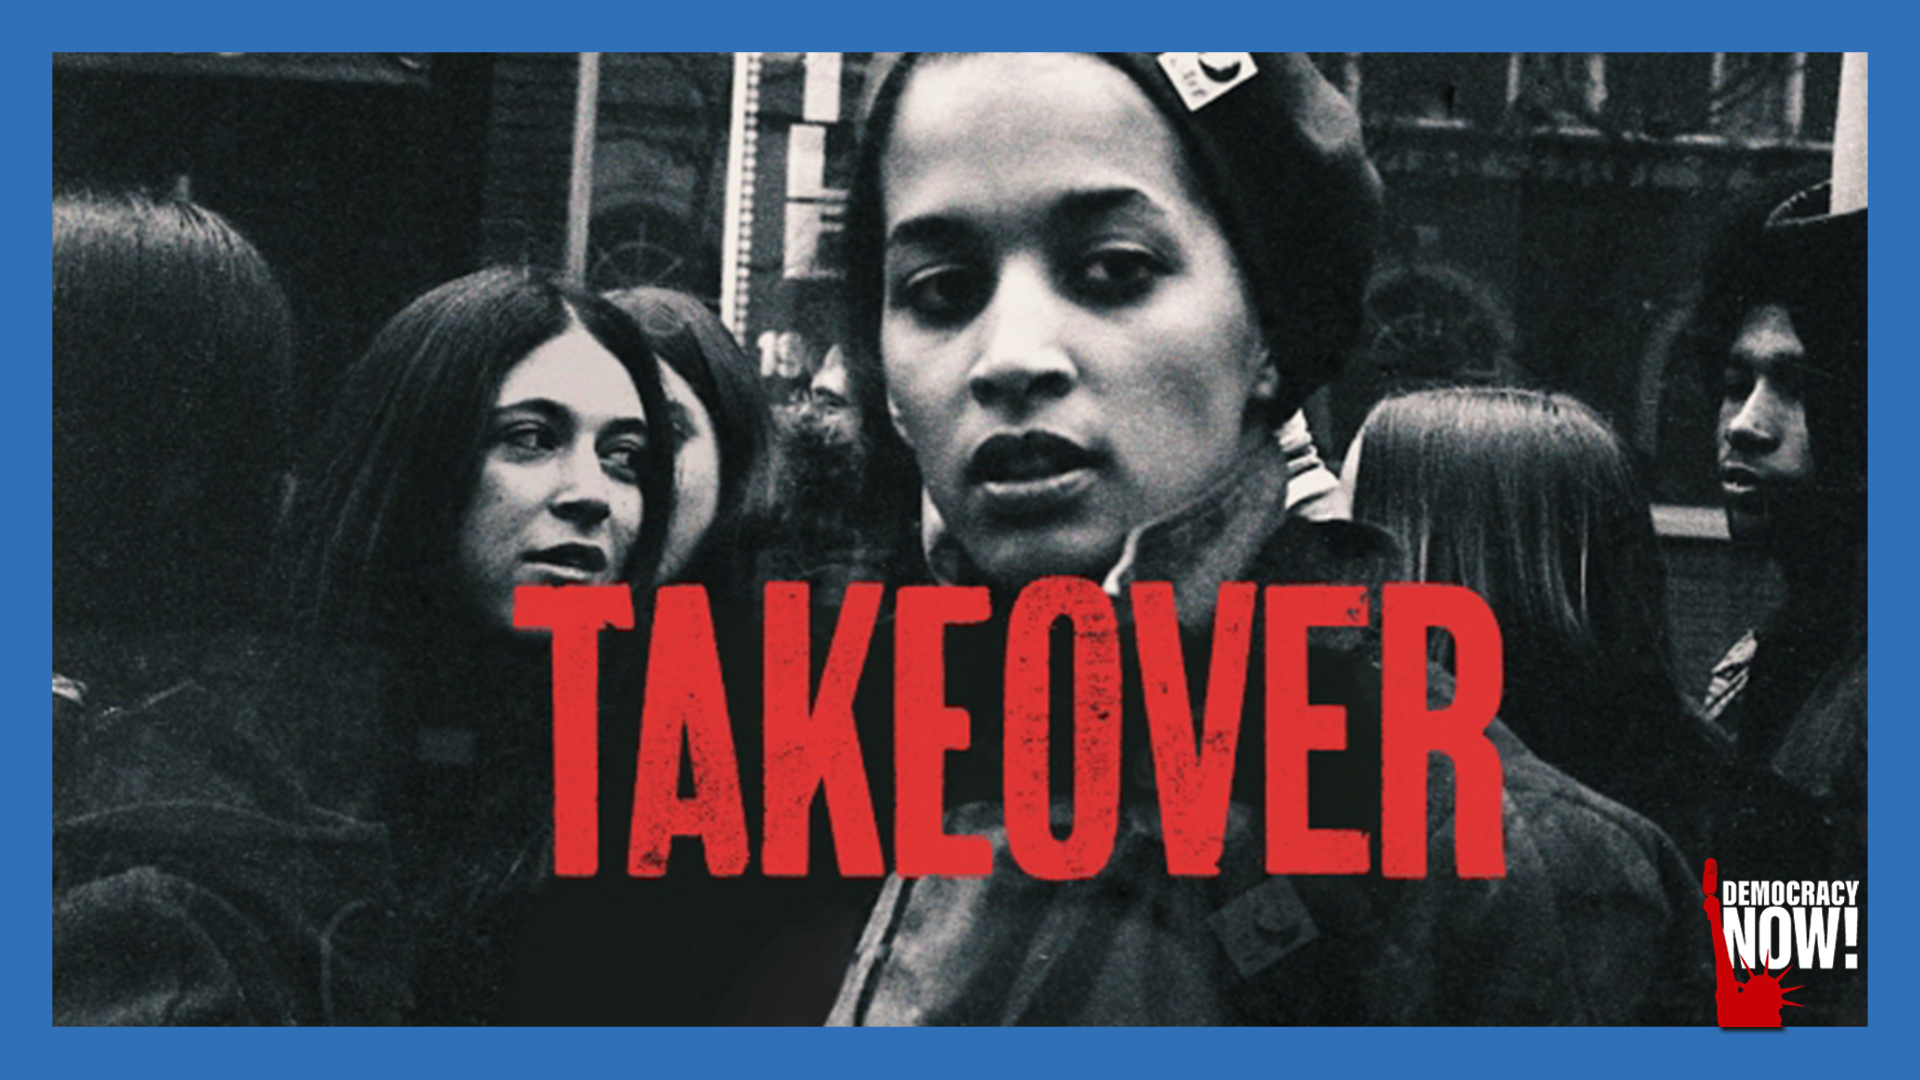 “Takeover”: Young Lords’ Juan González on Hospital Protest Doc. Shortlisted for Academy Award